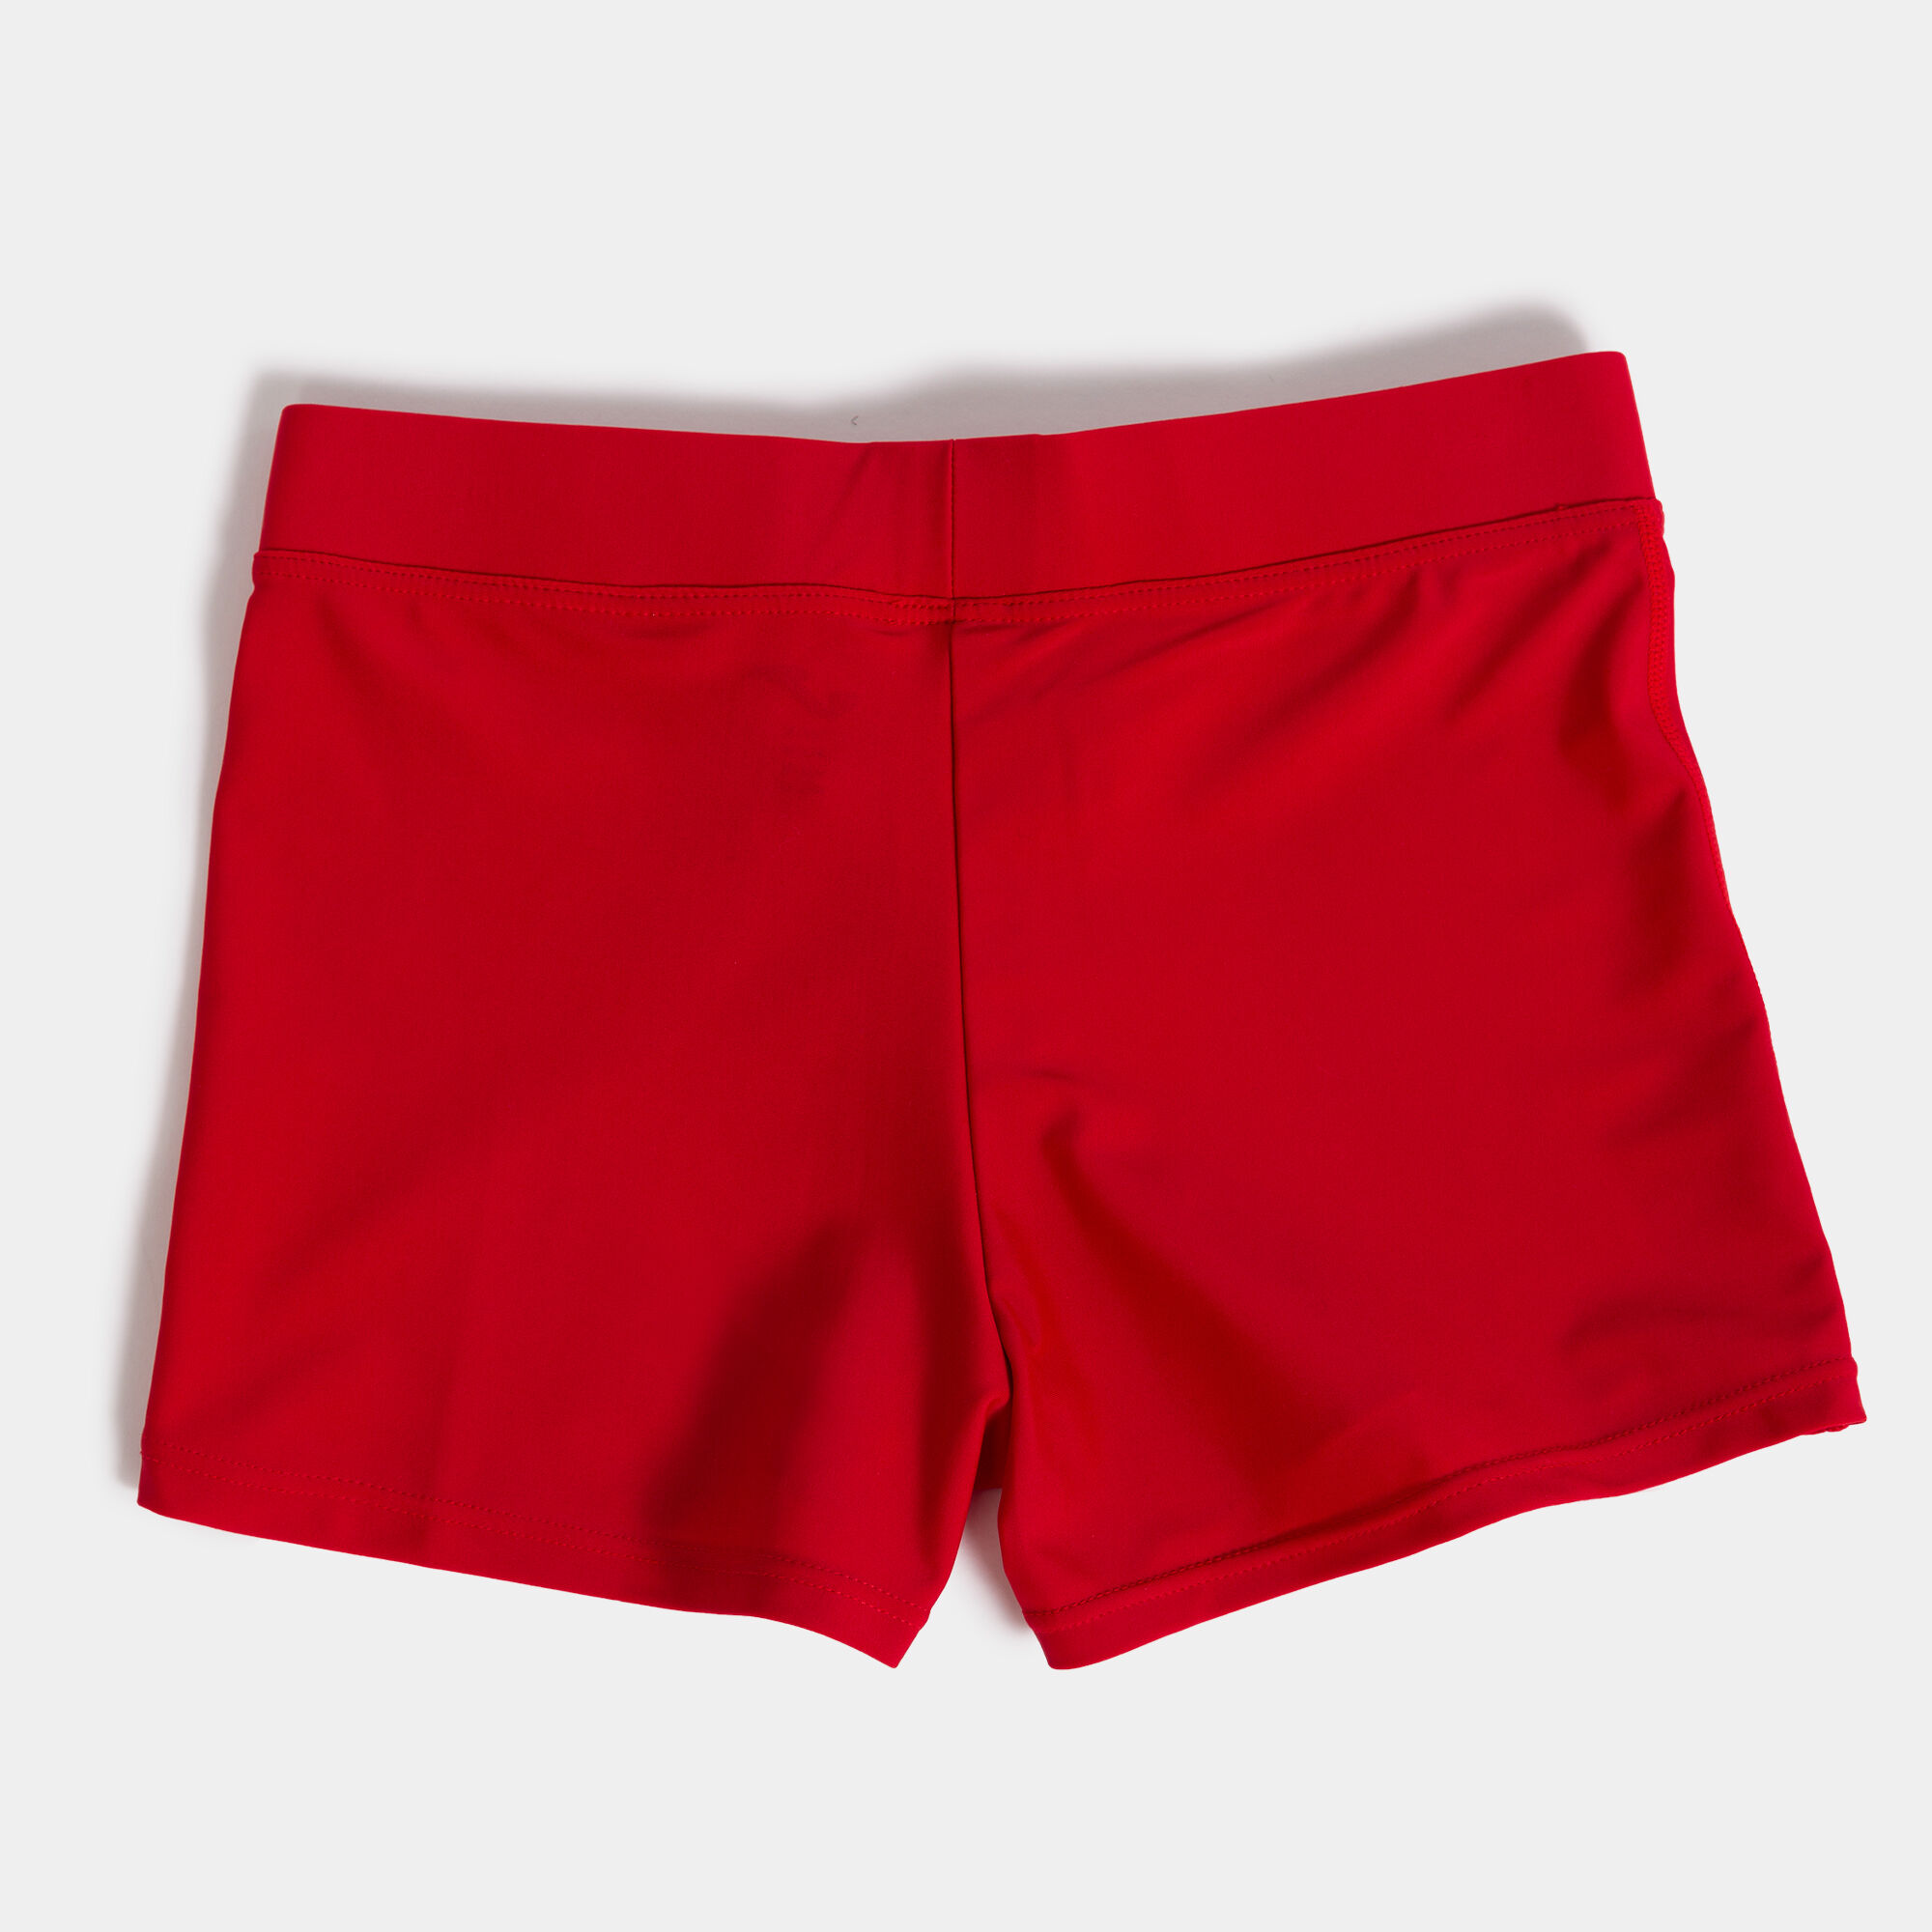 Maillot boxer homme Shark rouge blanc